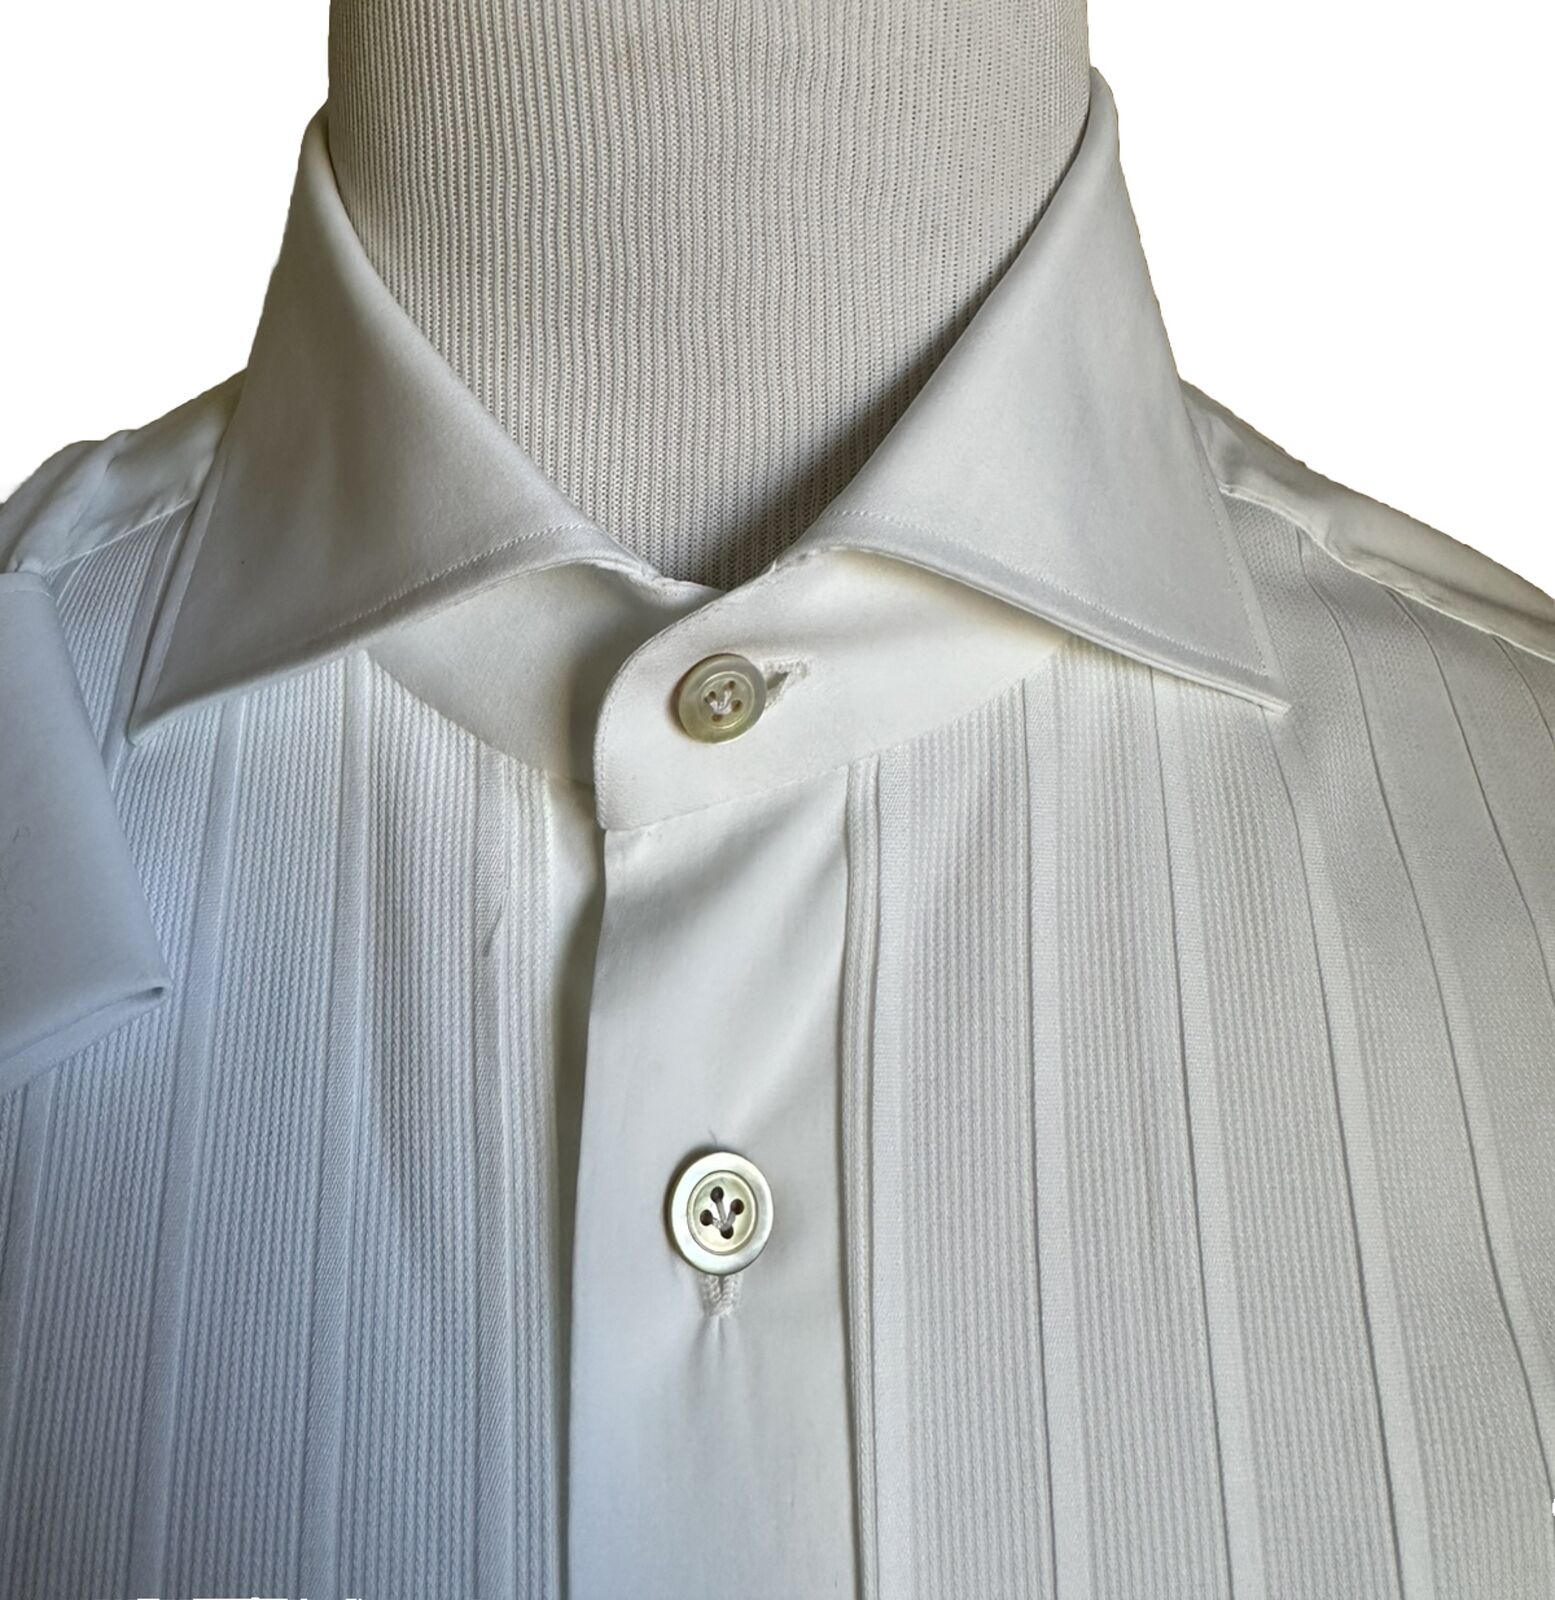 NWT $1165 Kiton Contemporary-Fit French Cuff Dress Shirt White 17.5/44 Italy